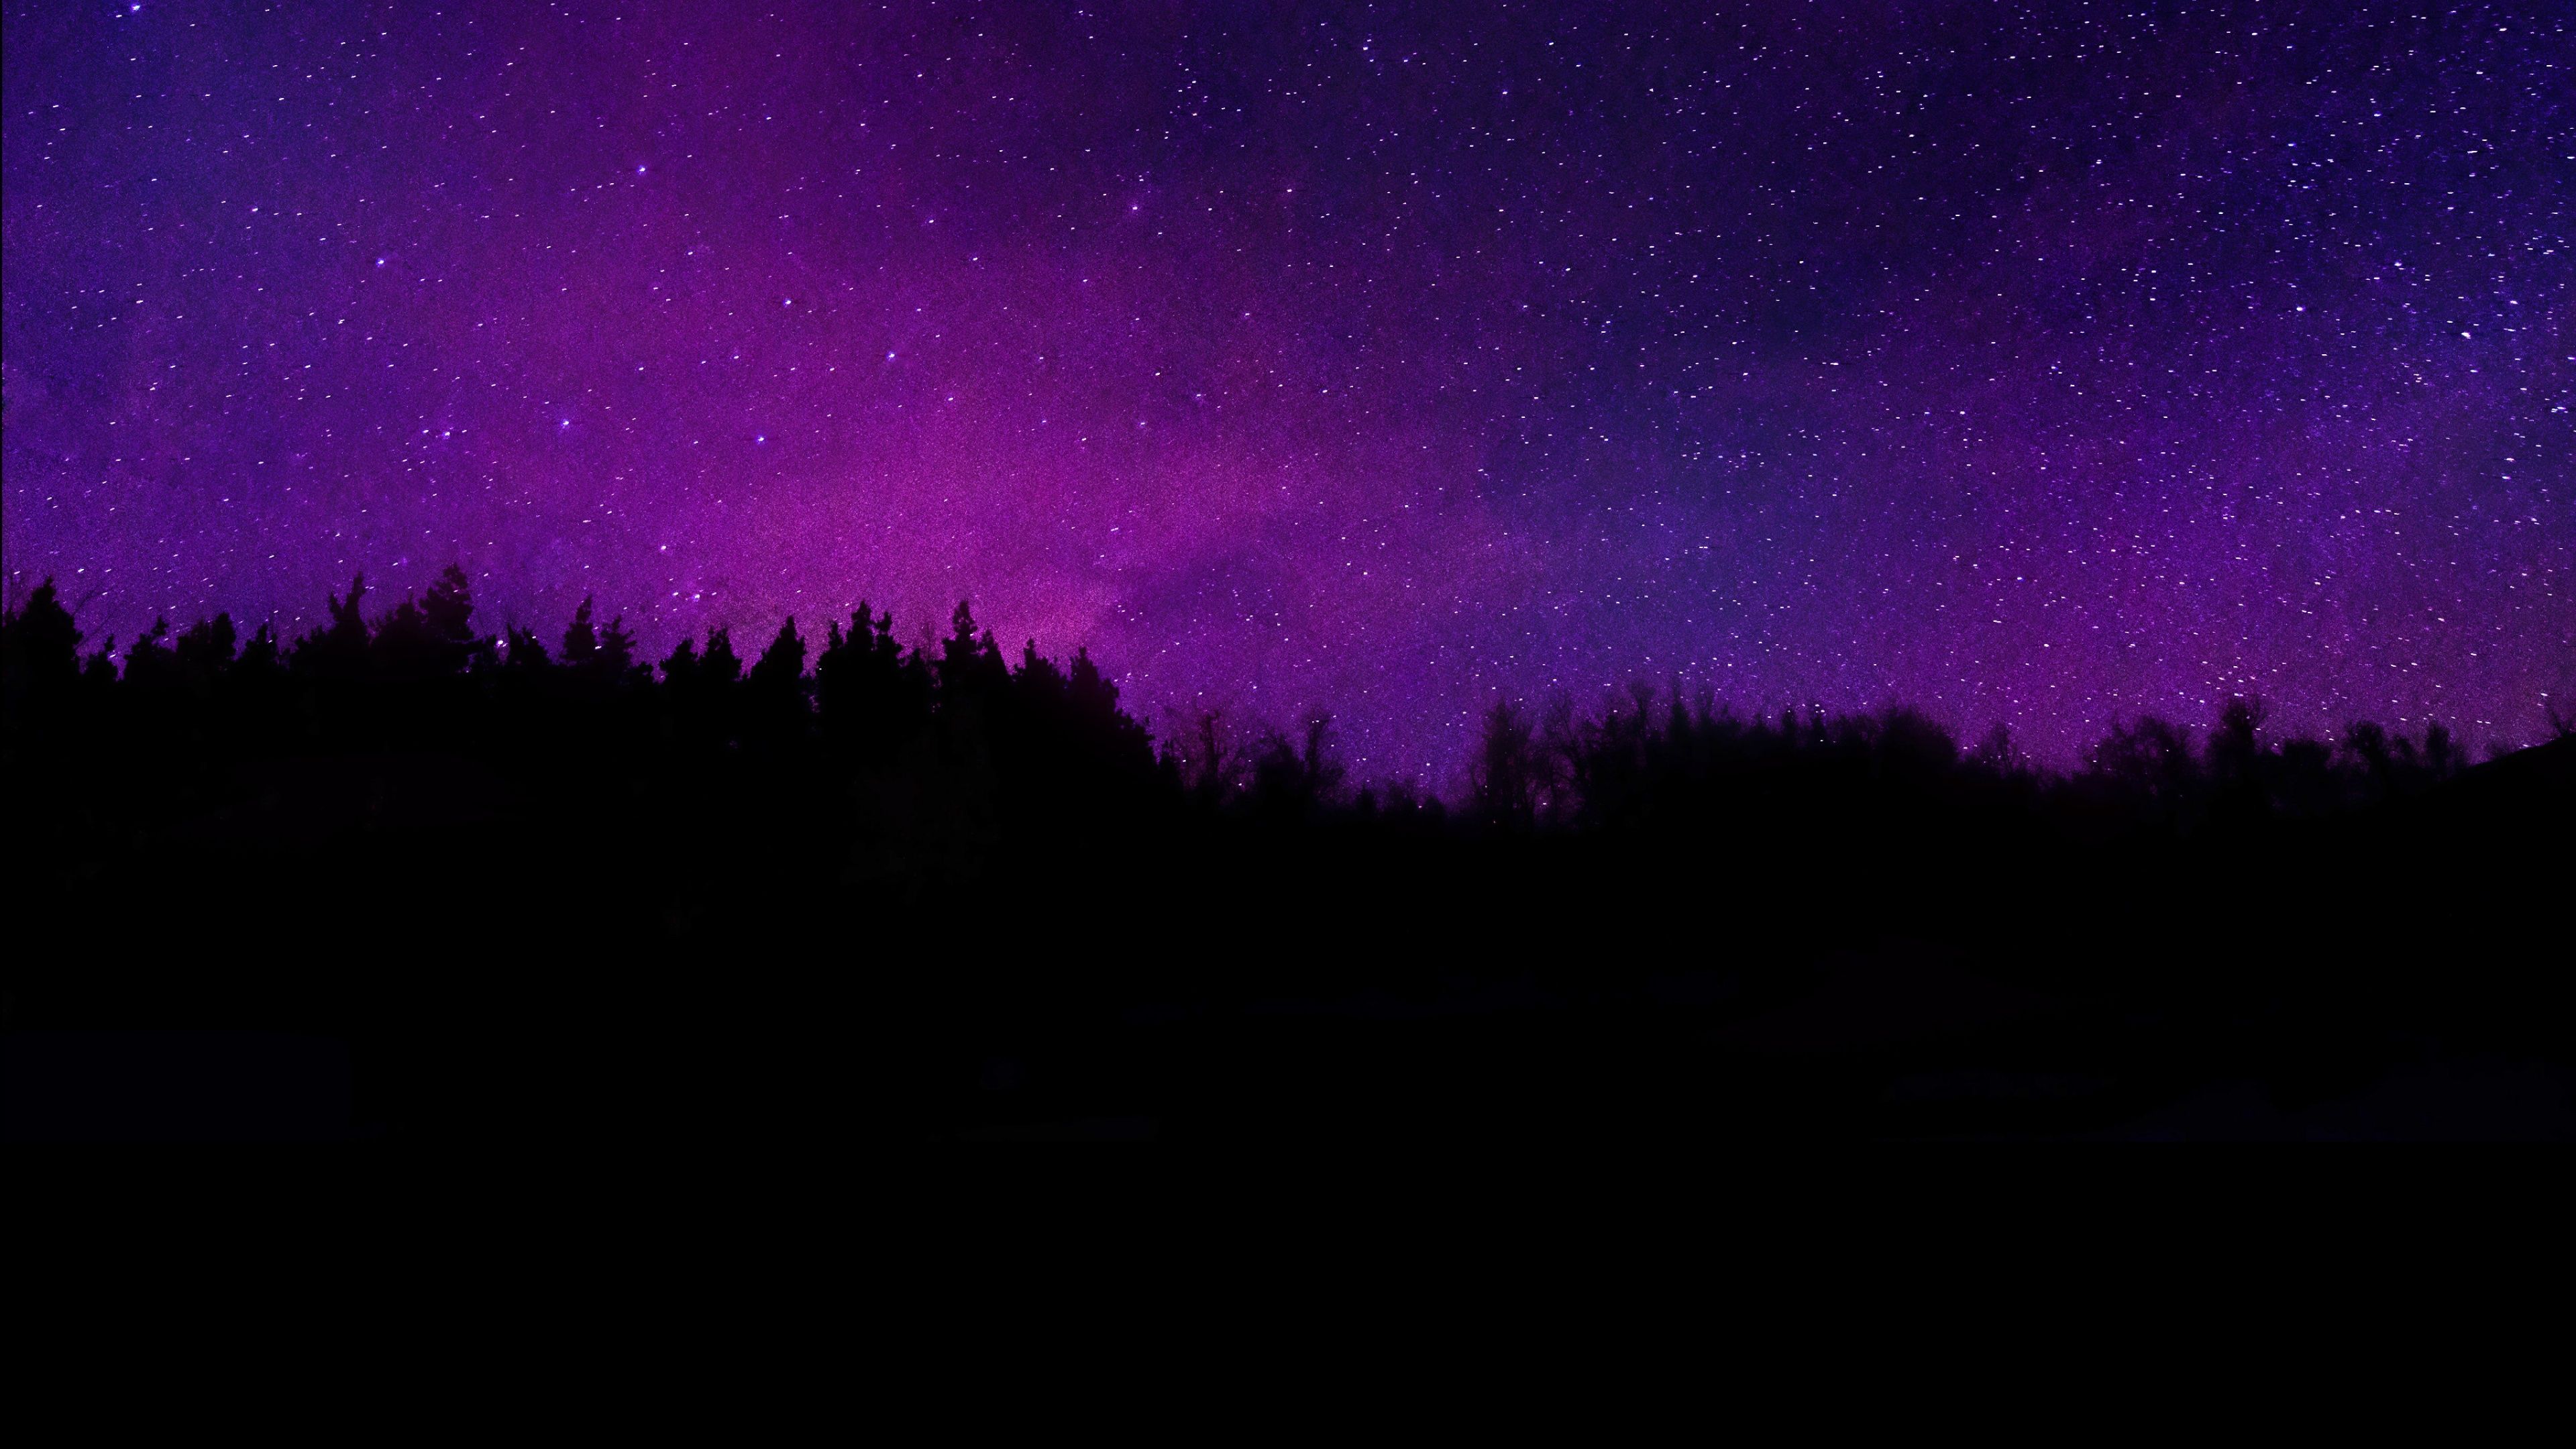 A purple sky with stars and trees - Night